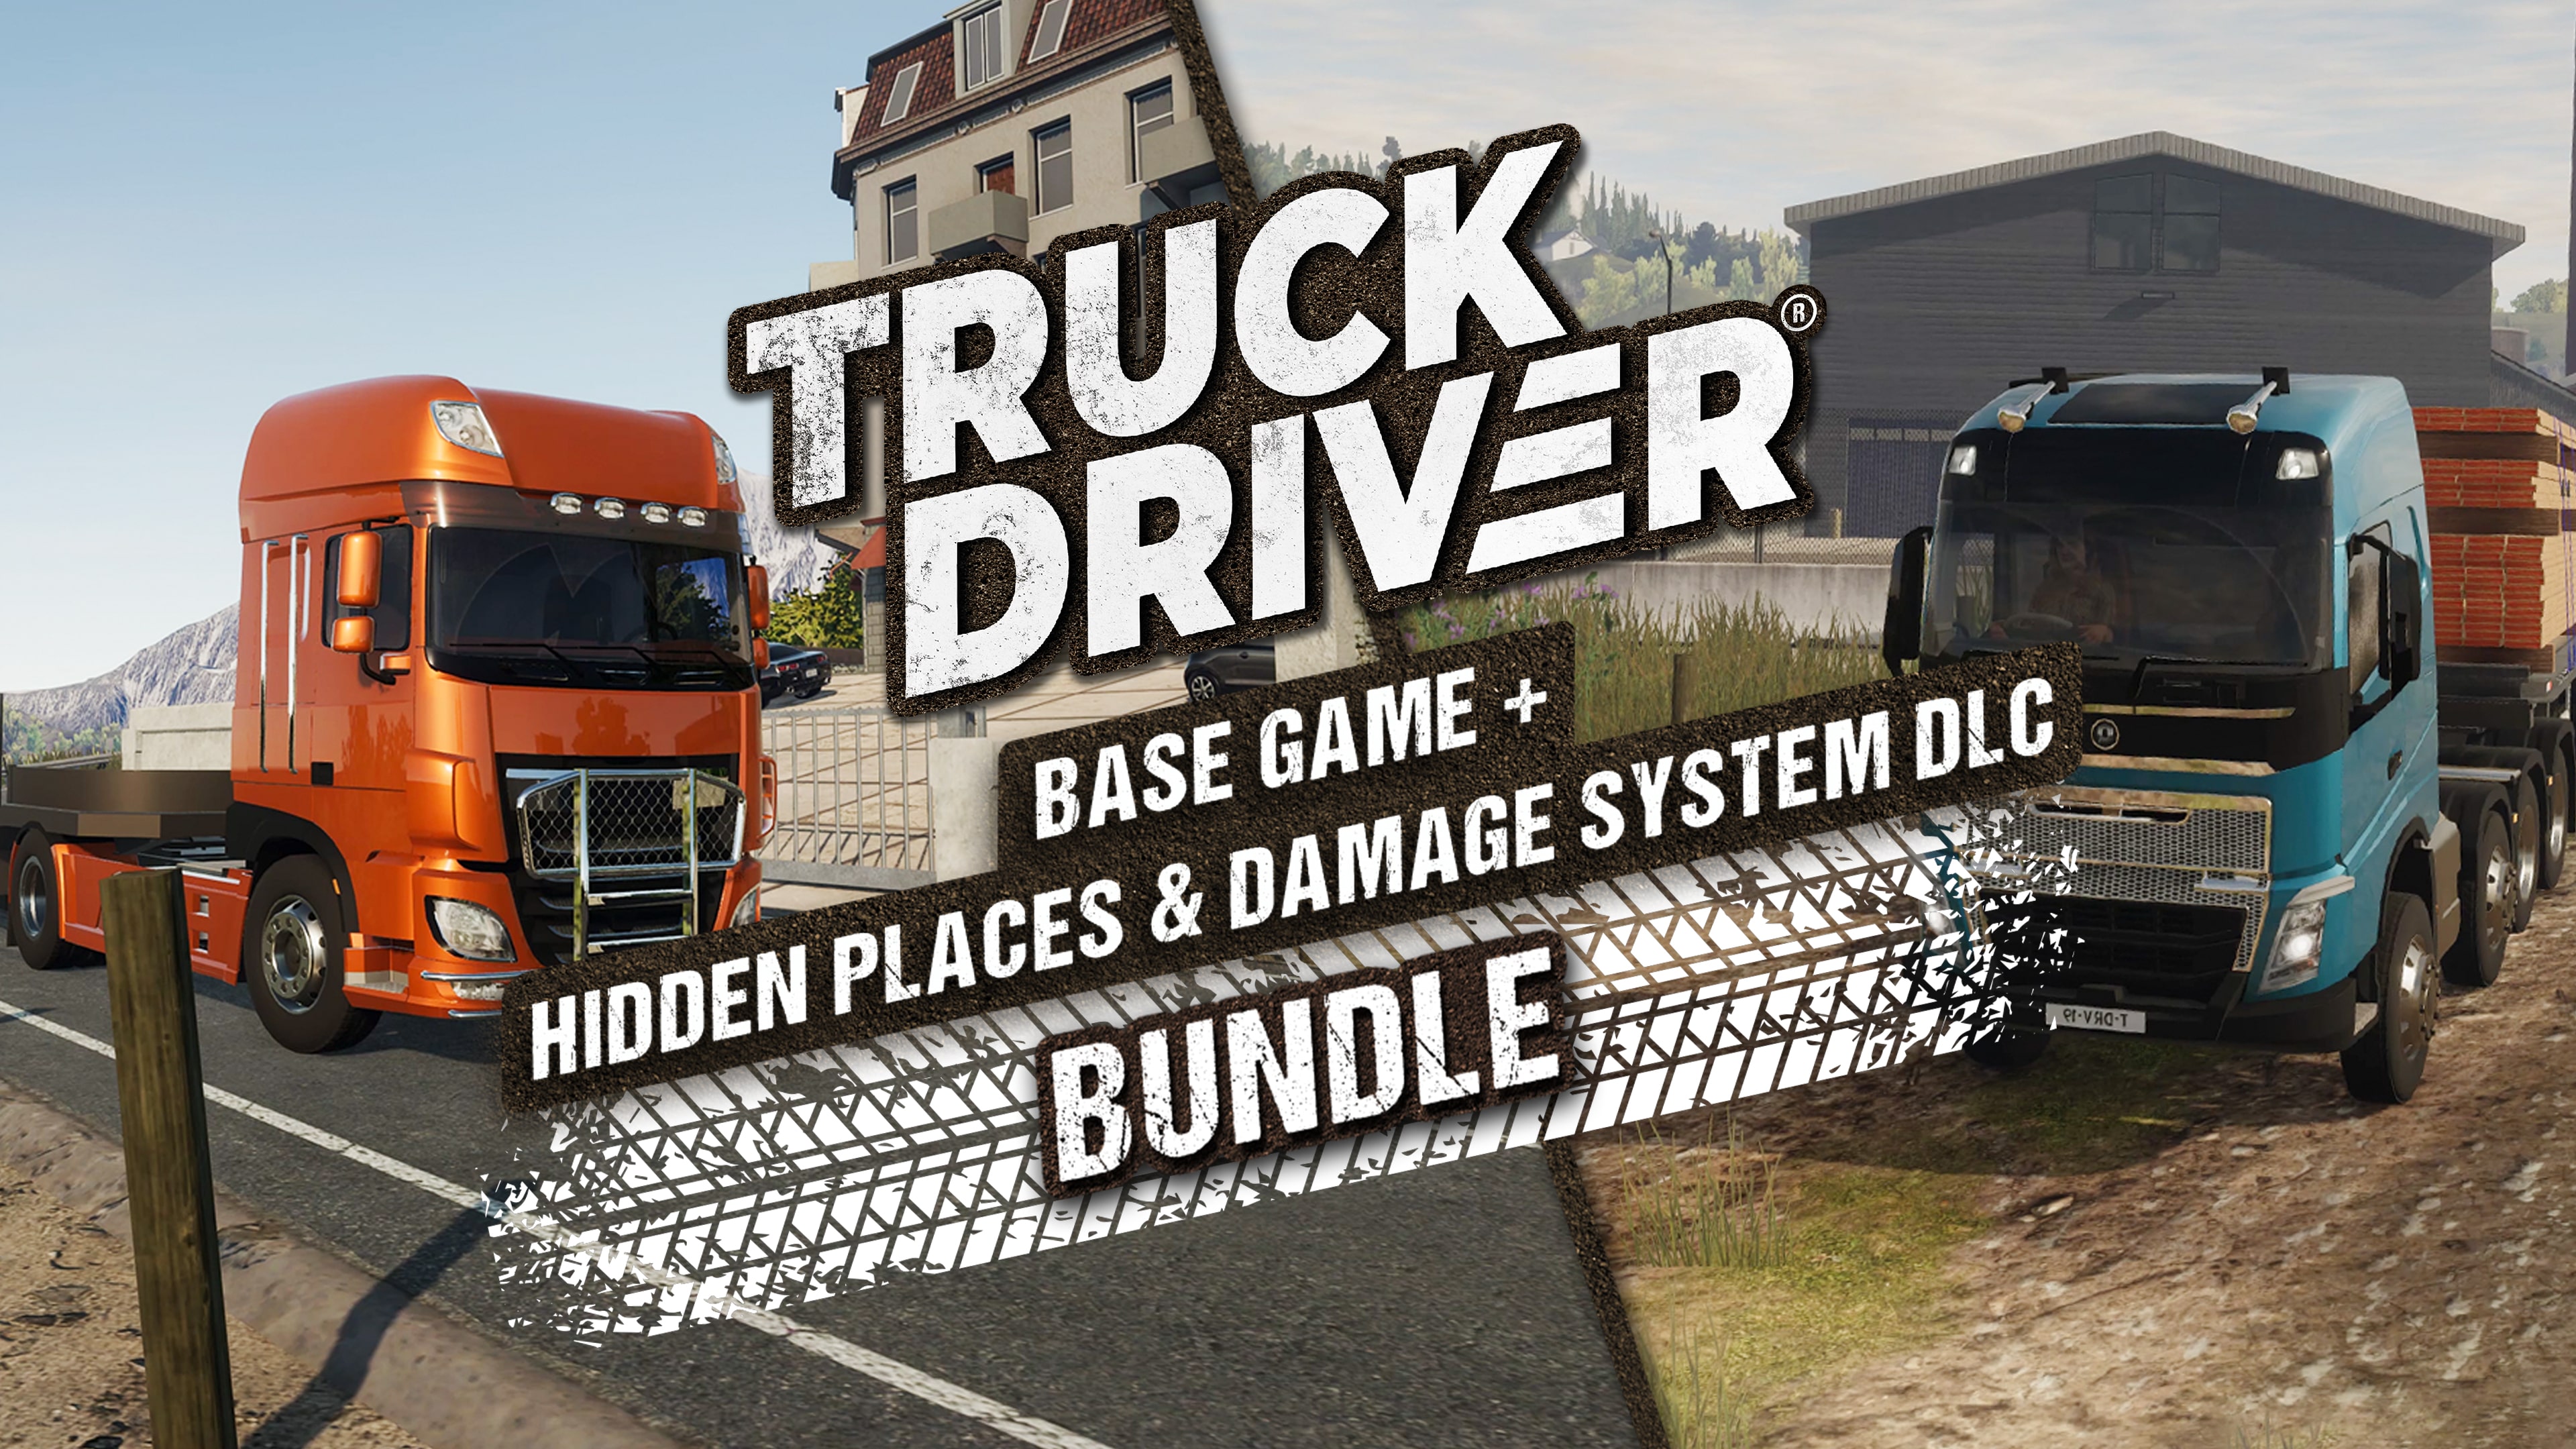 Truck Driver + Hidden Places & Damage System DLC Bundle (Simplified Chinese, English, Korean, Japanese, Traditional Chinese)